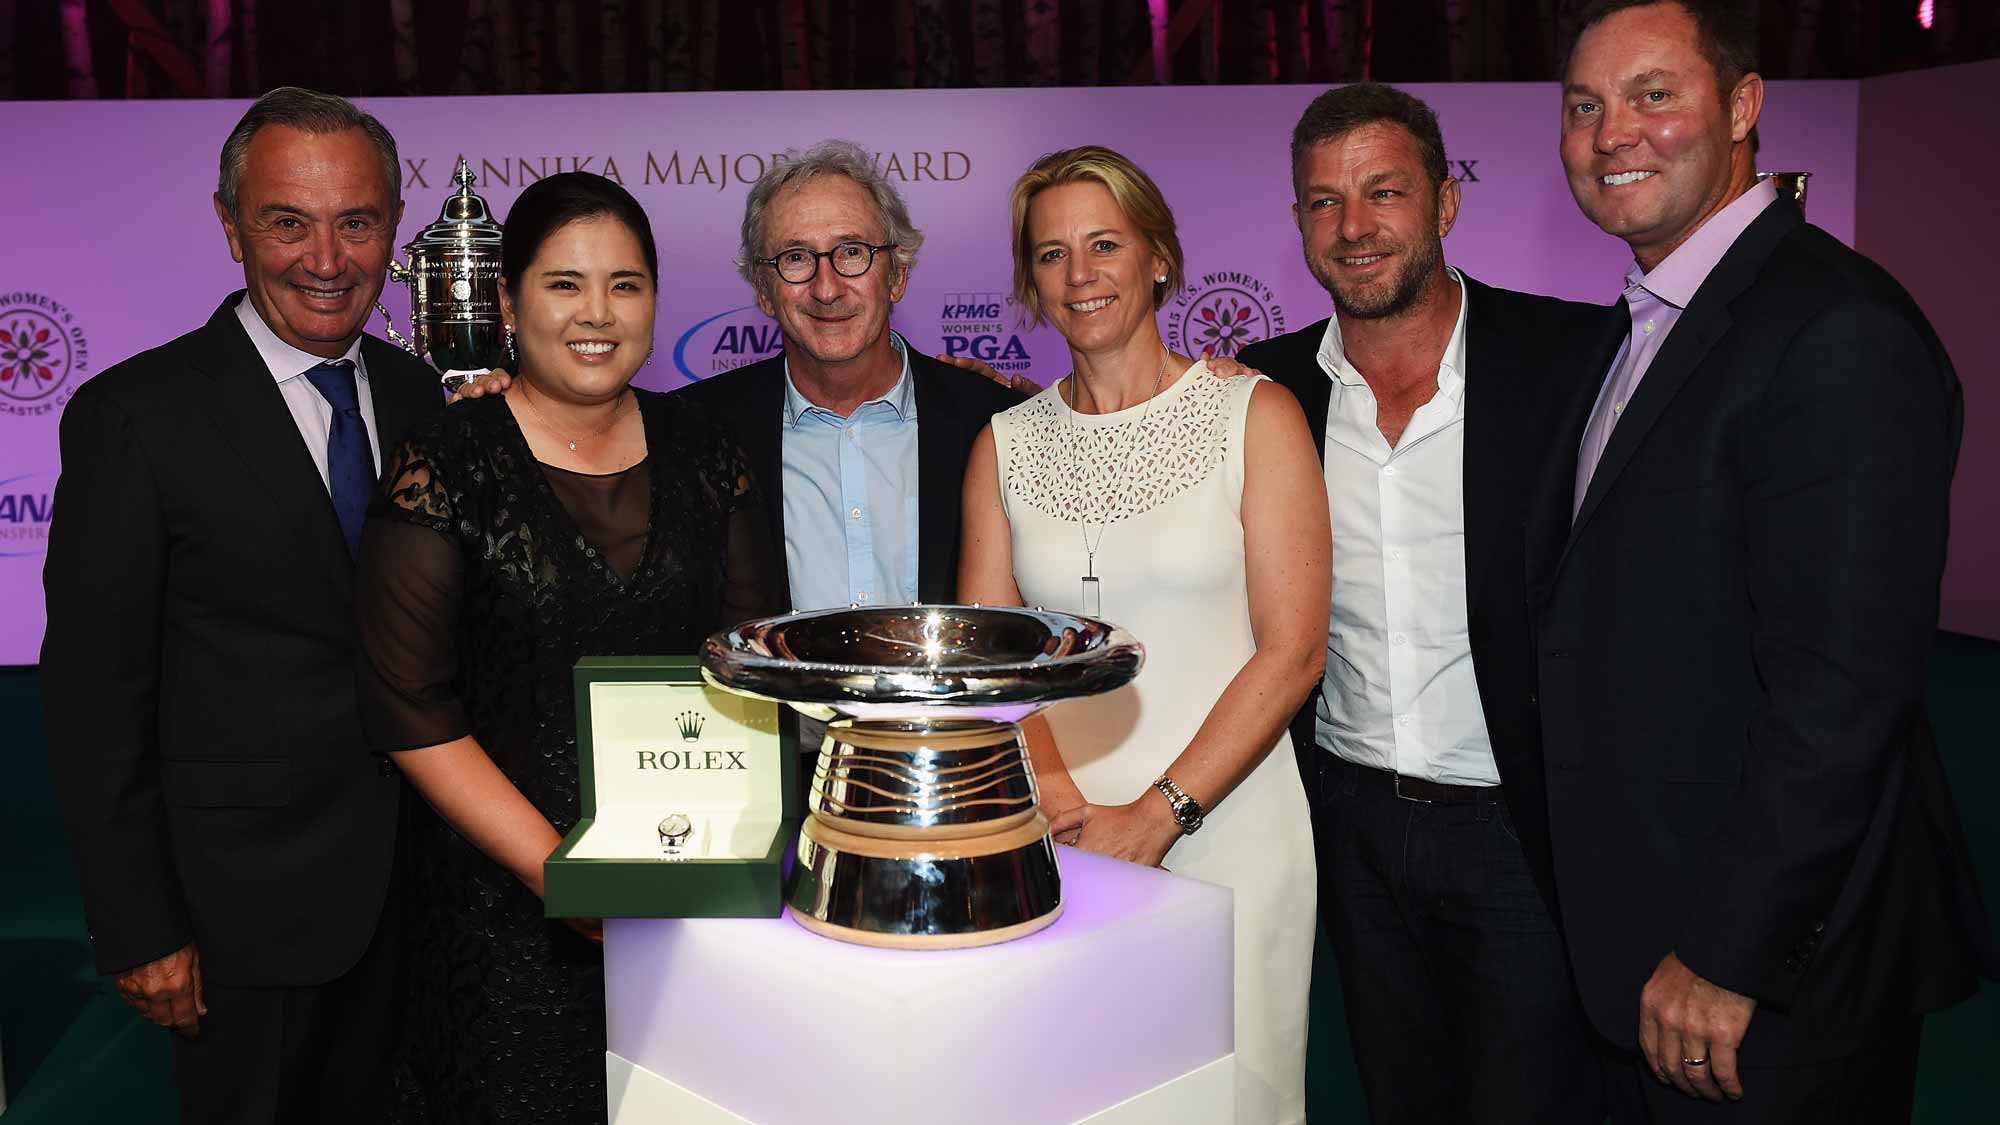 Jean-Noel Bioul, Inbee Park, Frank Riboud, Annika Sorestam, Jaques Bungert, and Mike Whan, LPGA Commissionerat the Rolex Award ceremony after the third round of the Evian Championship